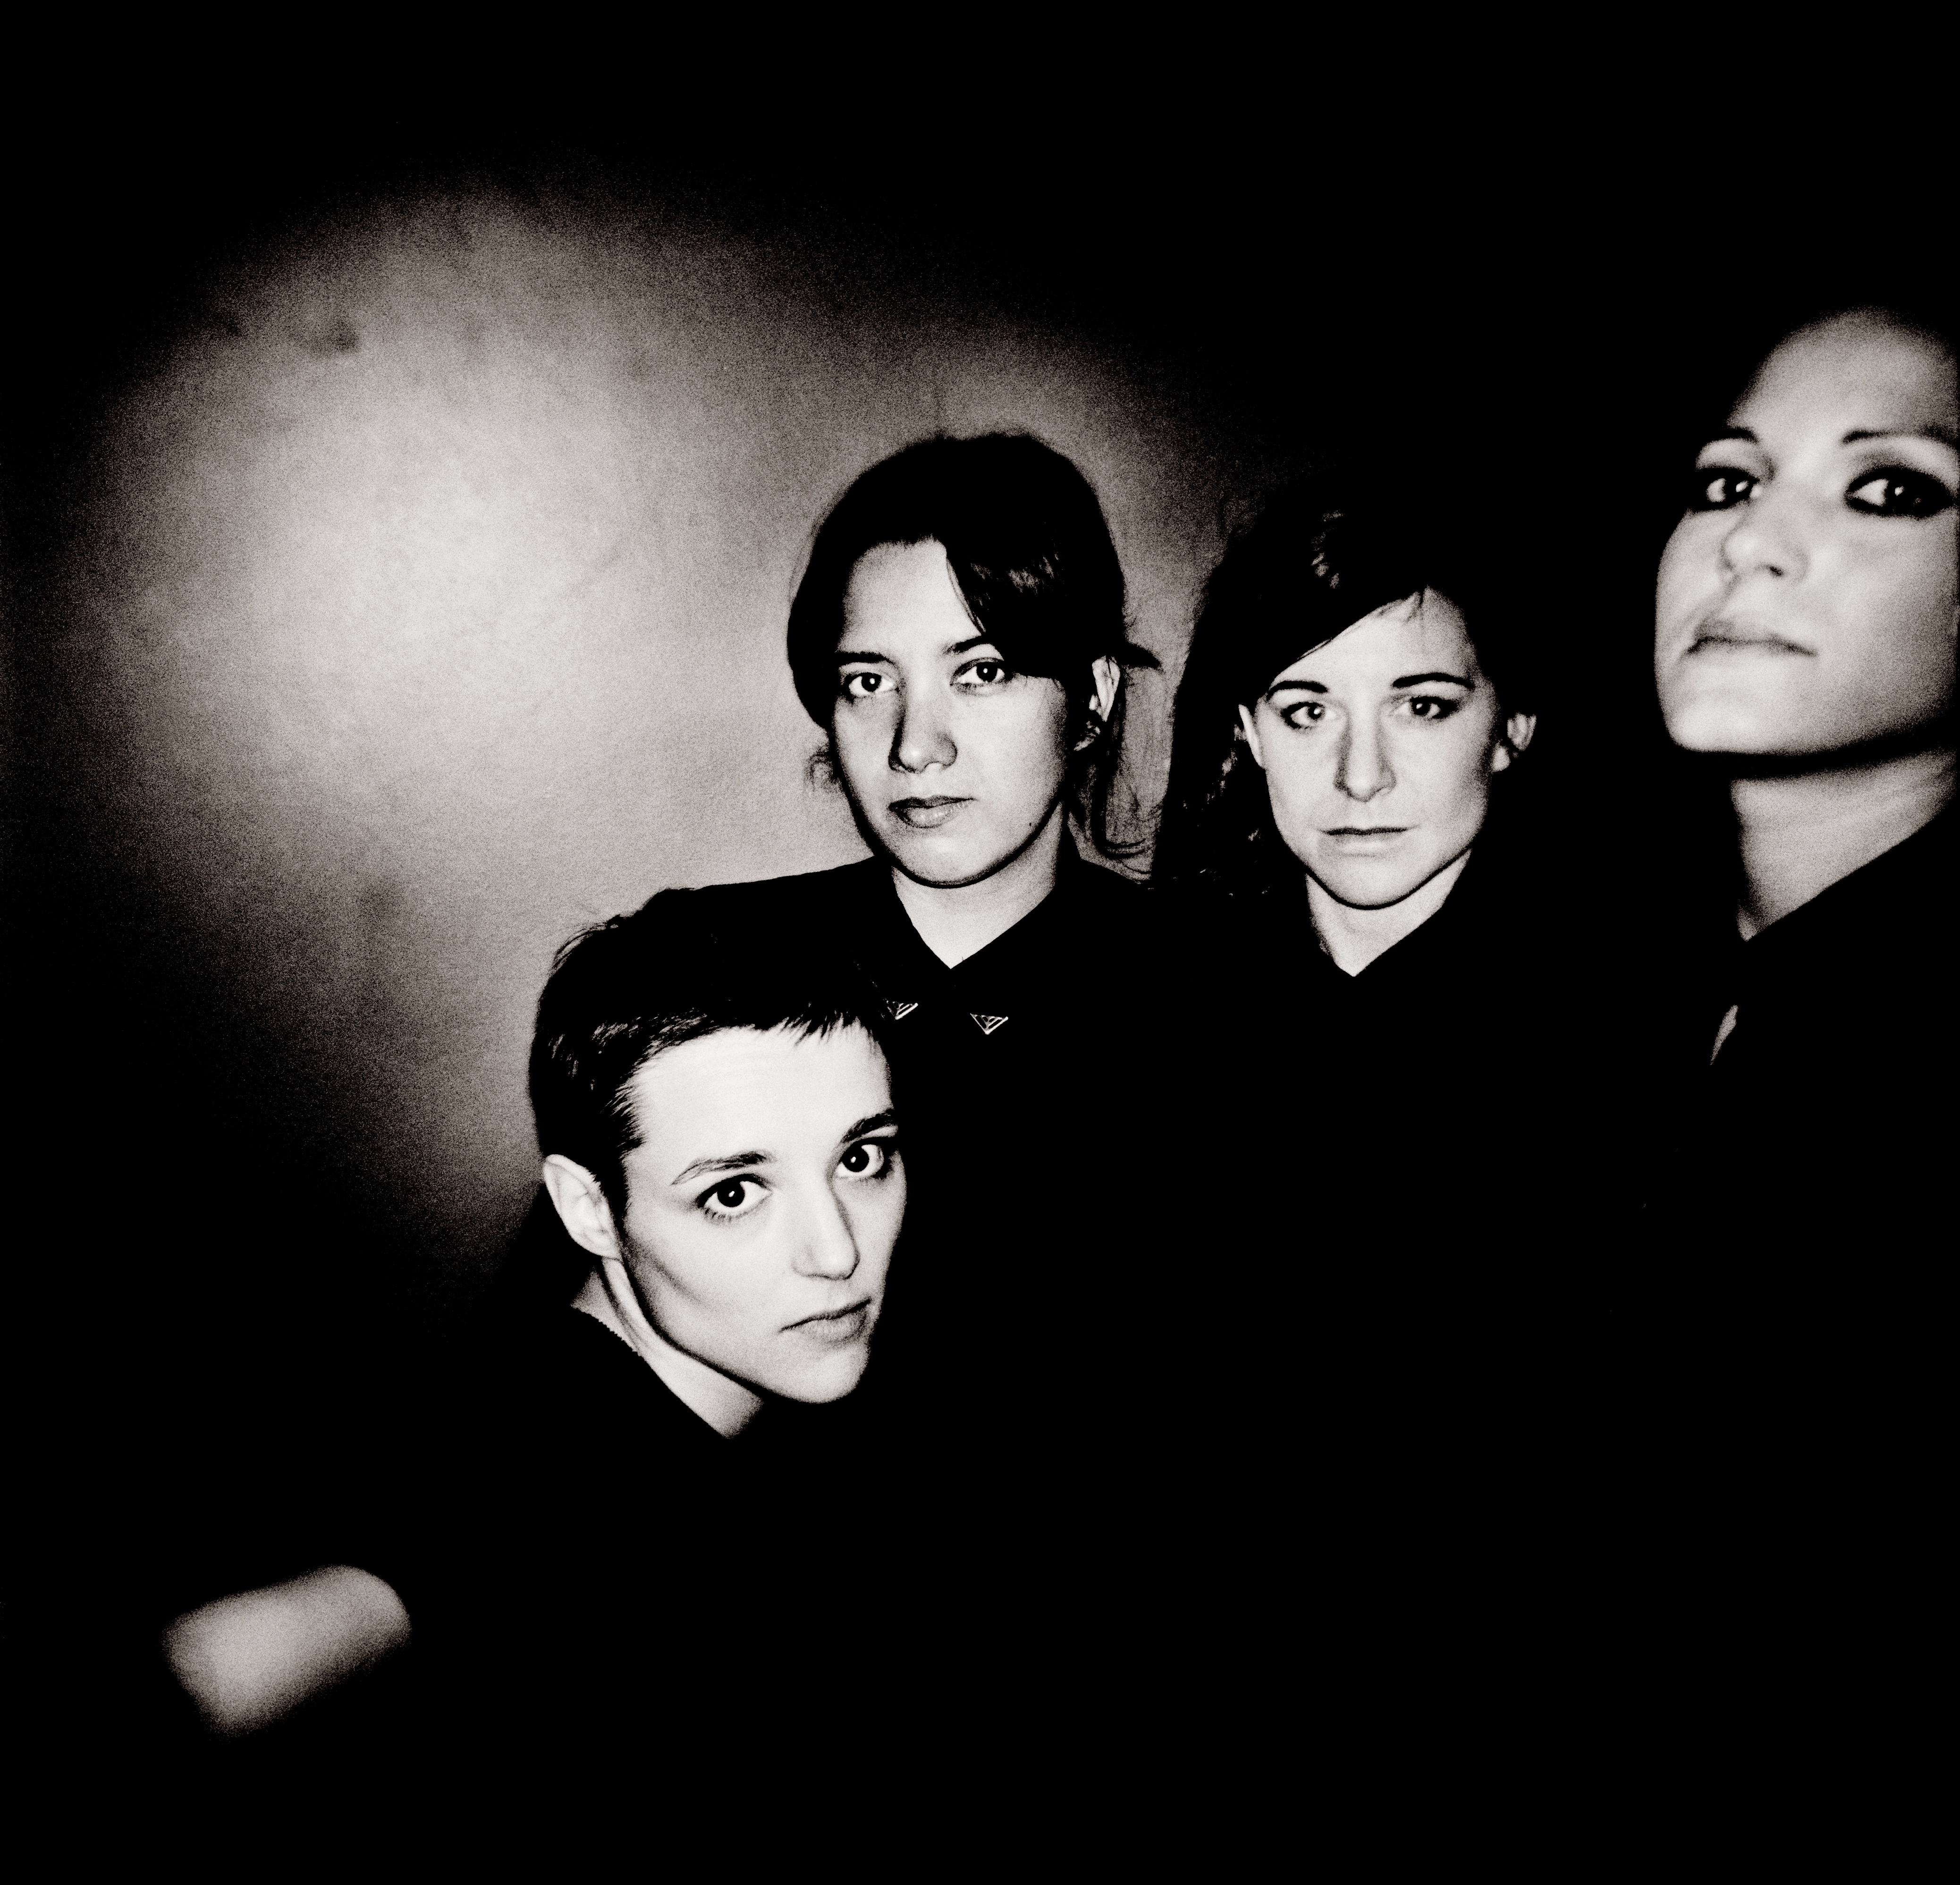 Savages release new video for title-track "Adore". Savages forthcoming album comes out January 22nd on Matador Records.